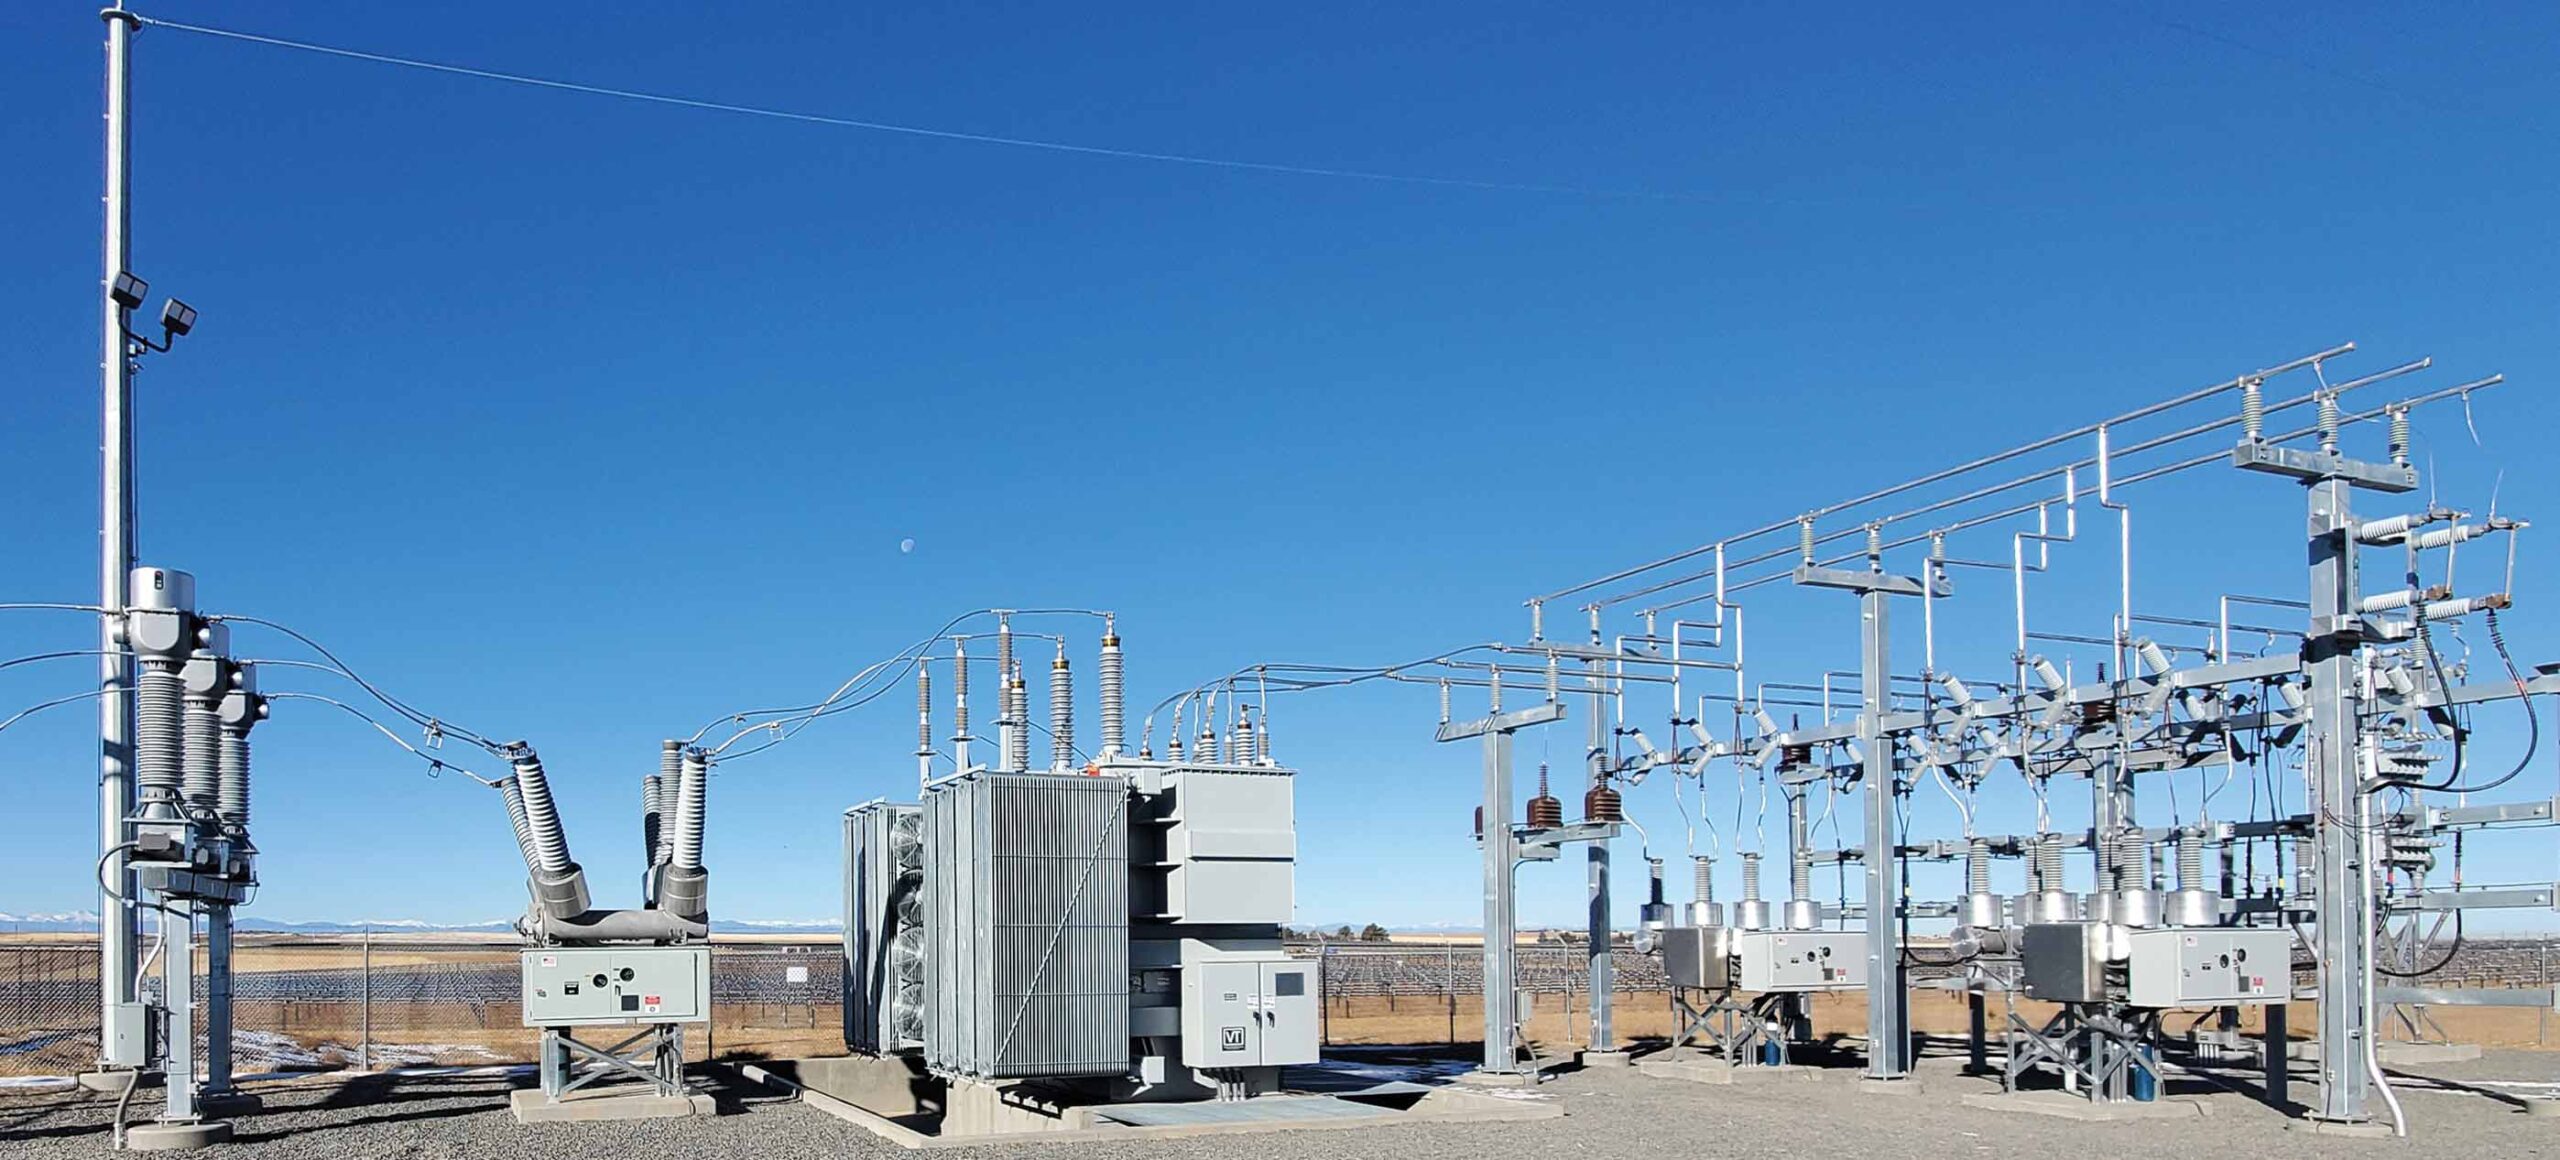 photo of a high voltage substation behind a fence with a blue sky backround